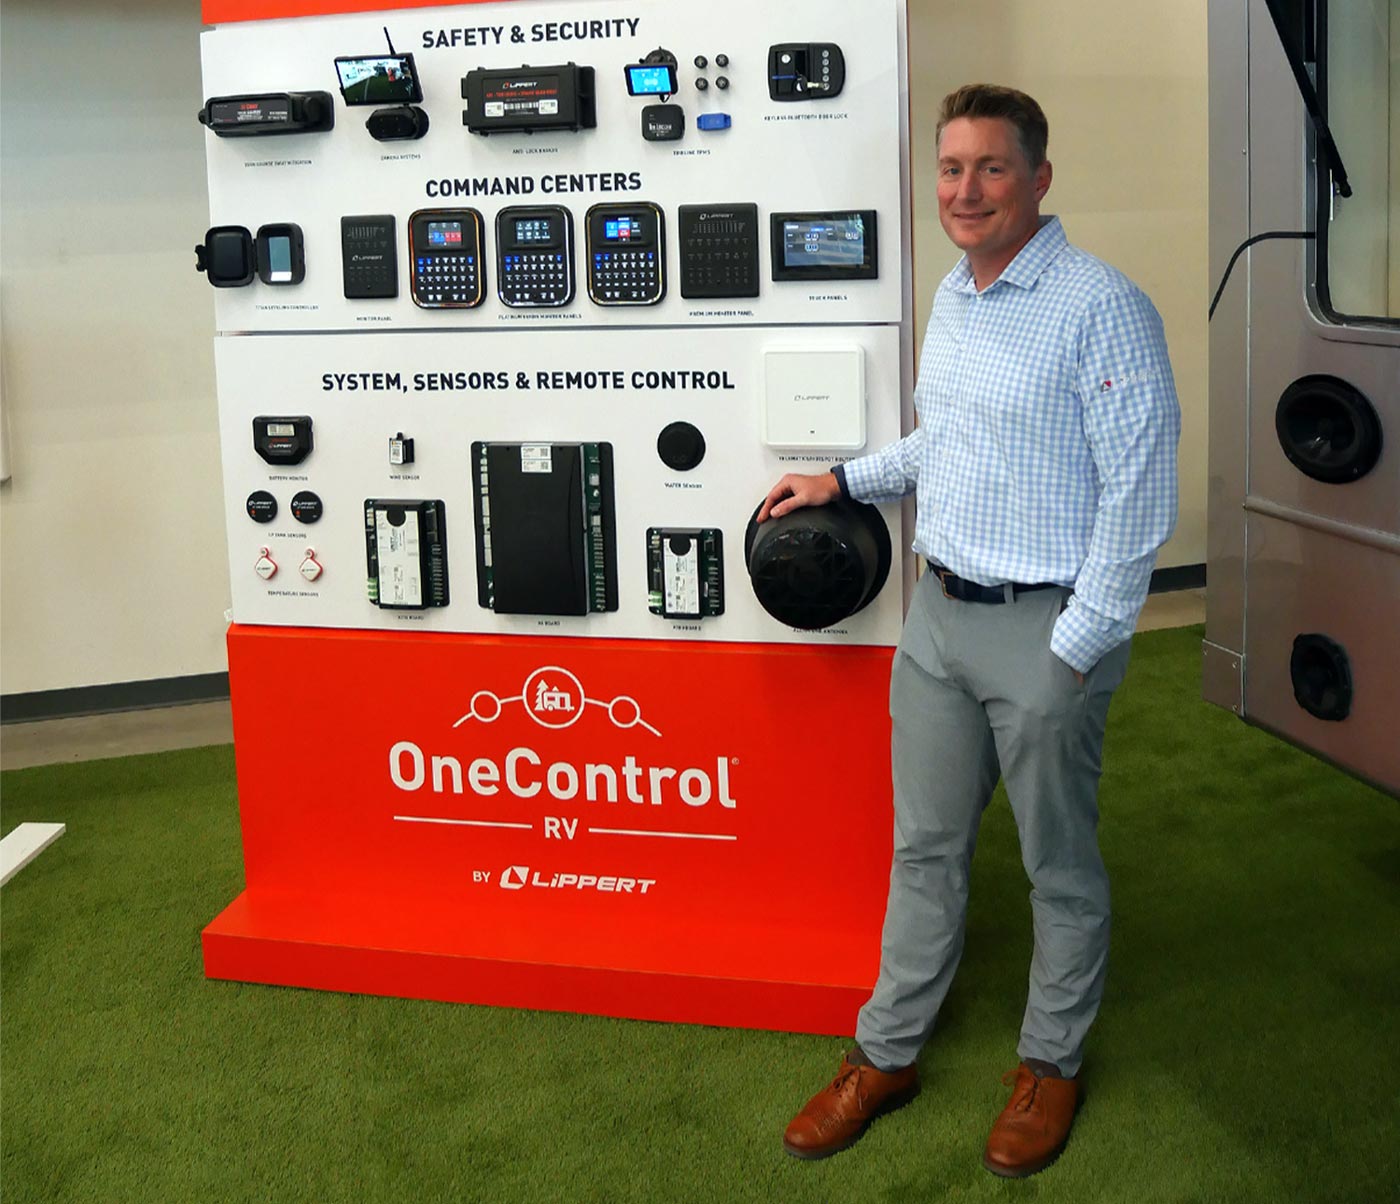 Jarod Lippert wearing a light blue plaid button up shirt and slacks smiles while standing alongside a OneControl display showing the wealth of functions the device now controls